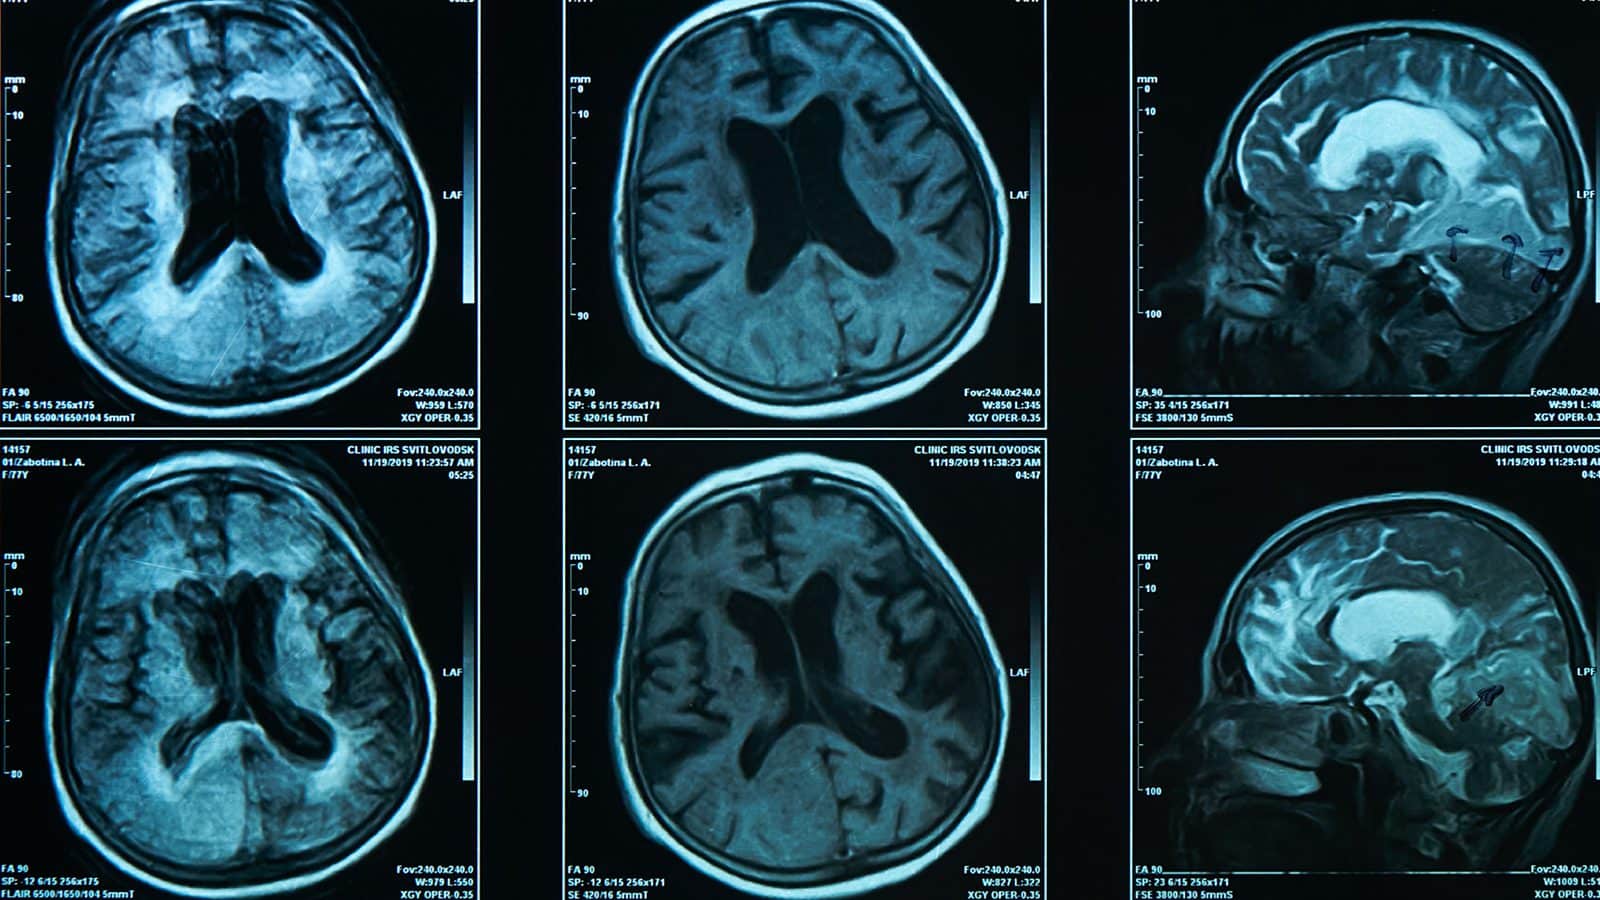 AI Brain Scan Diagnoses Alzheimers Correctly 98% of the Time